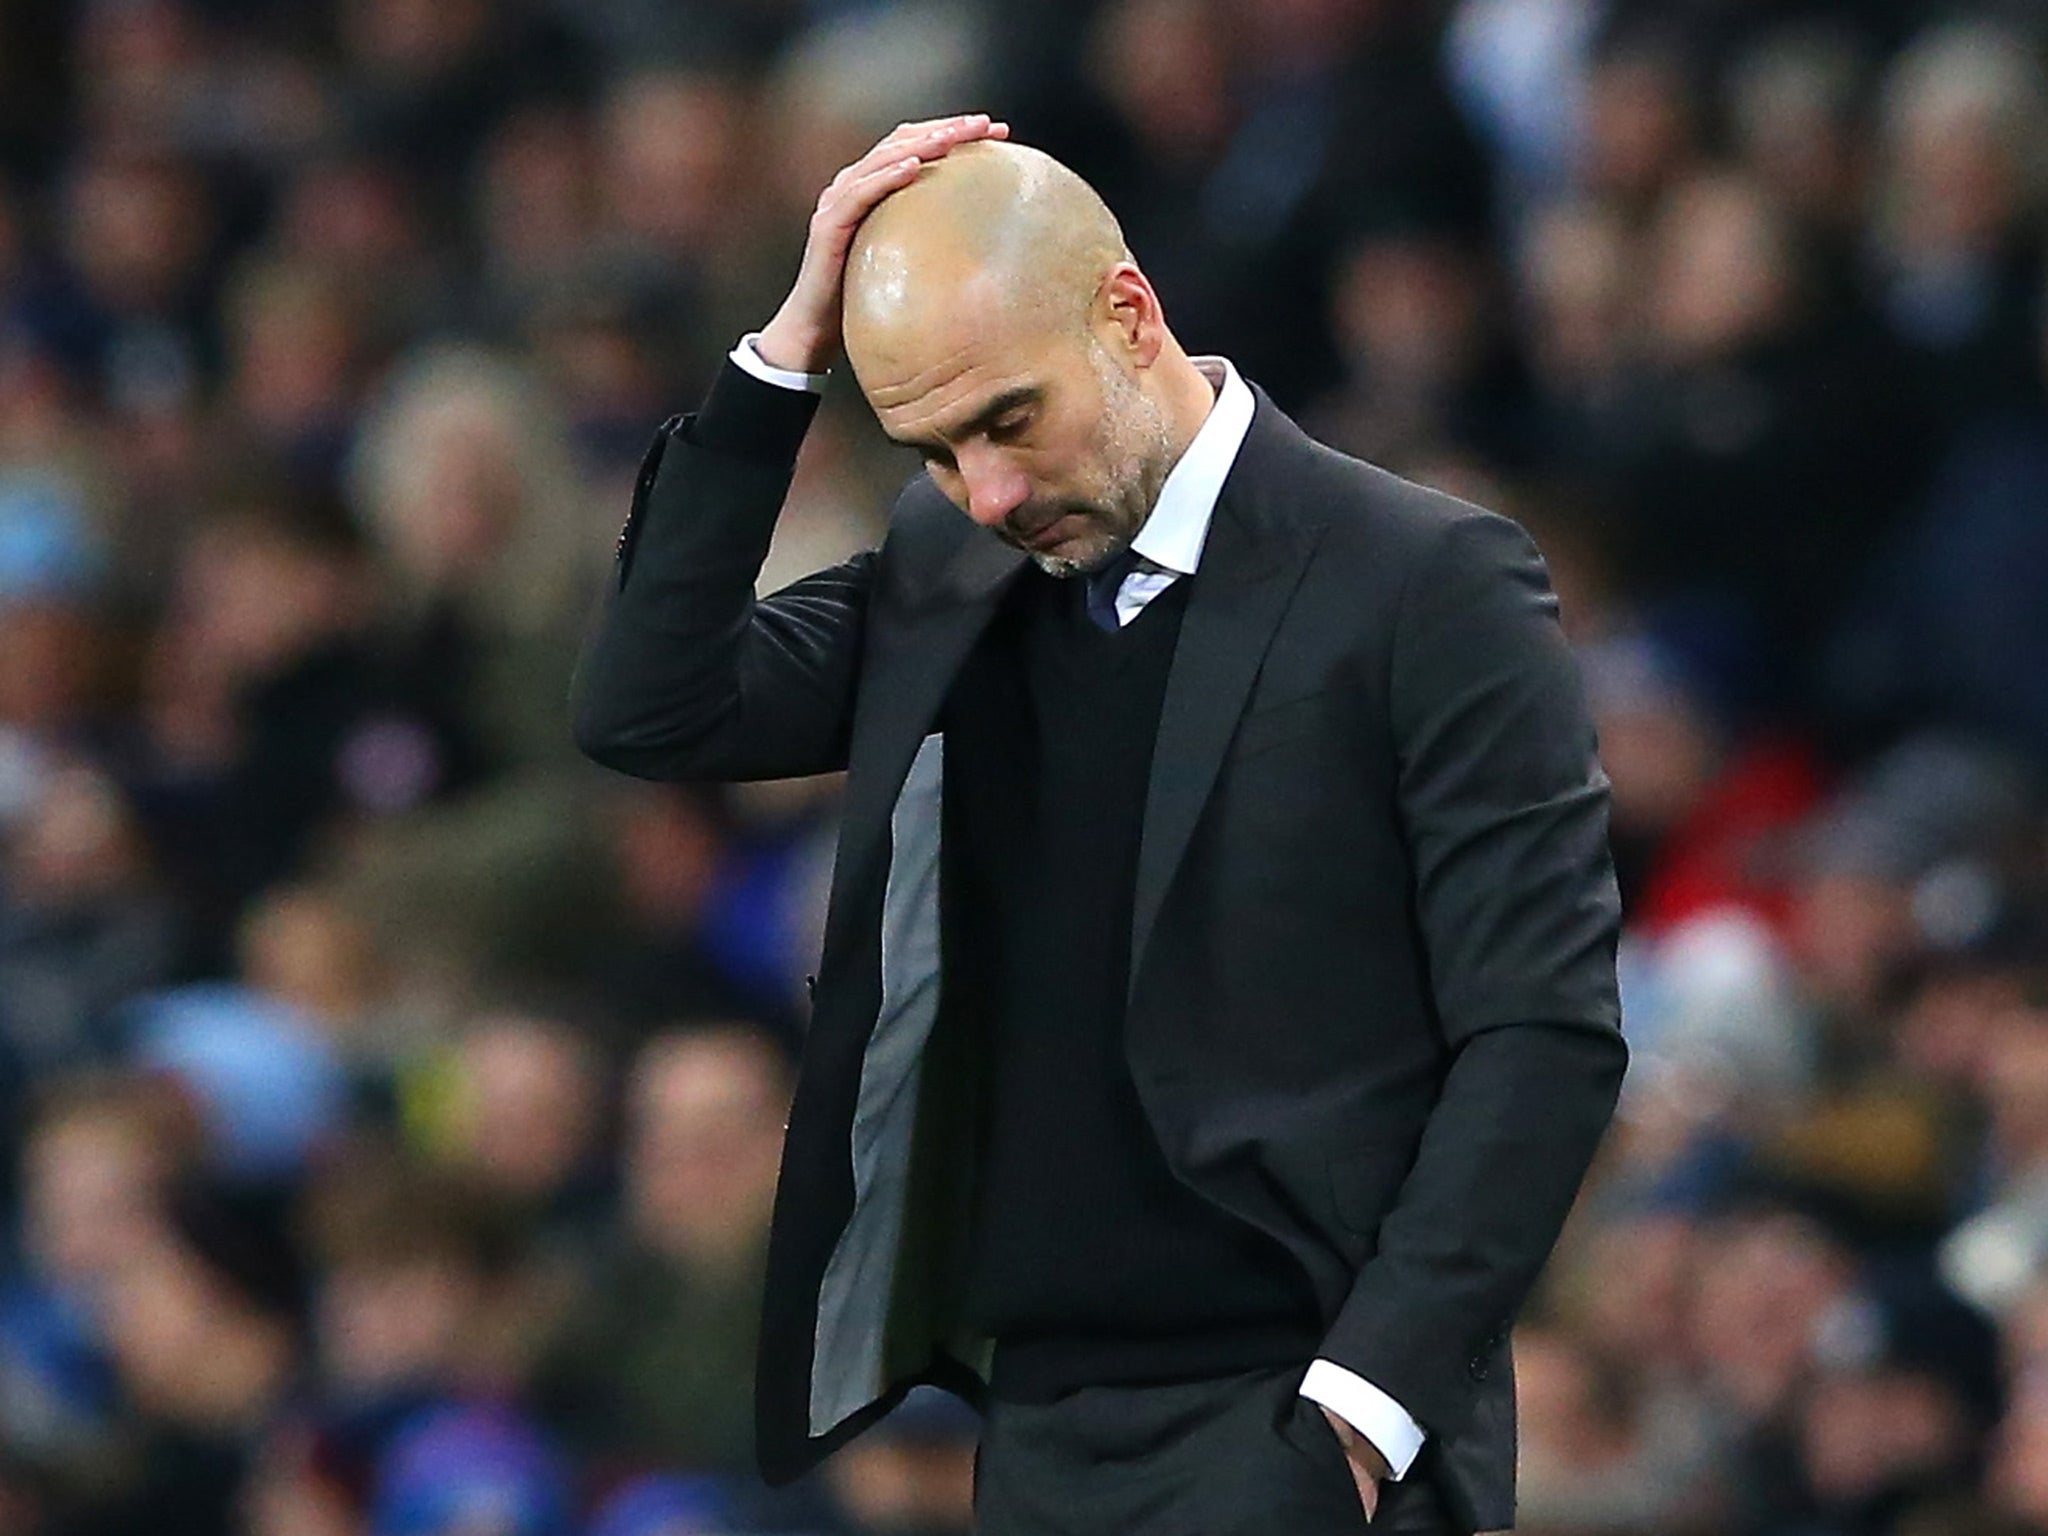 Guardiola was once again left scratching his head while watching his side's display